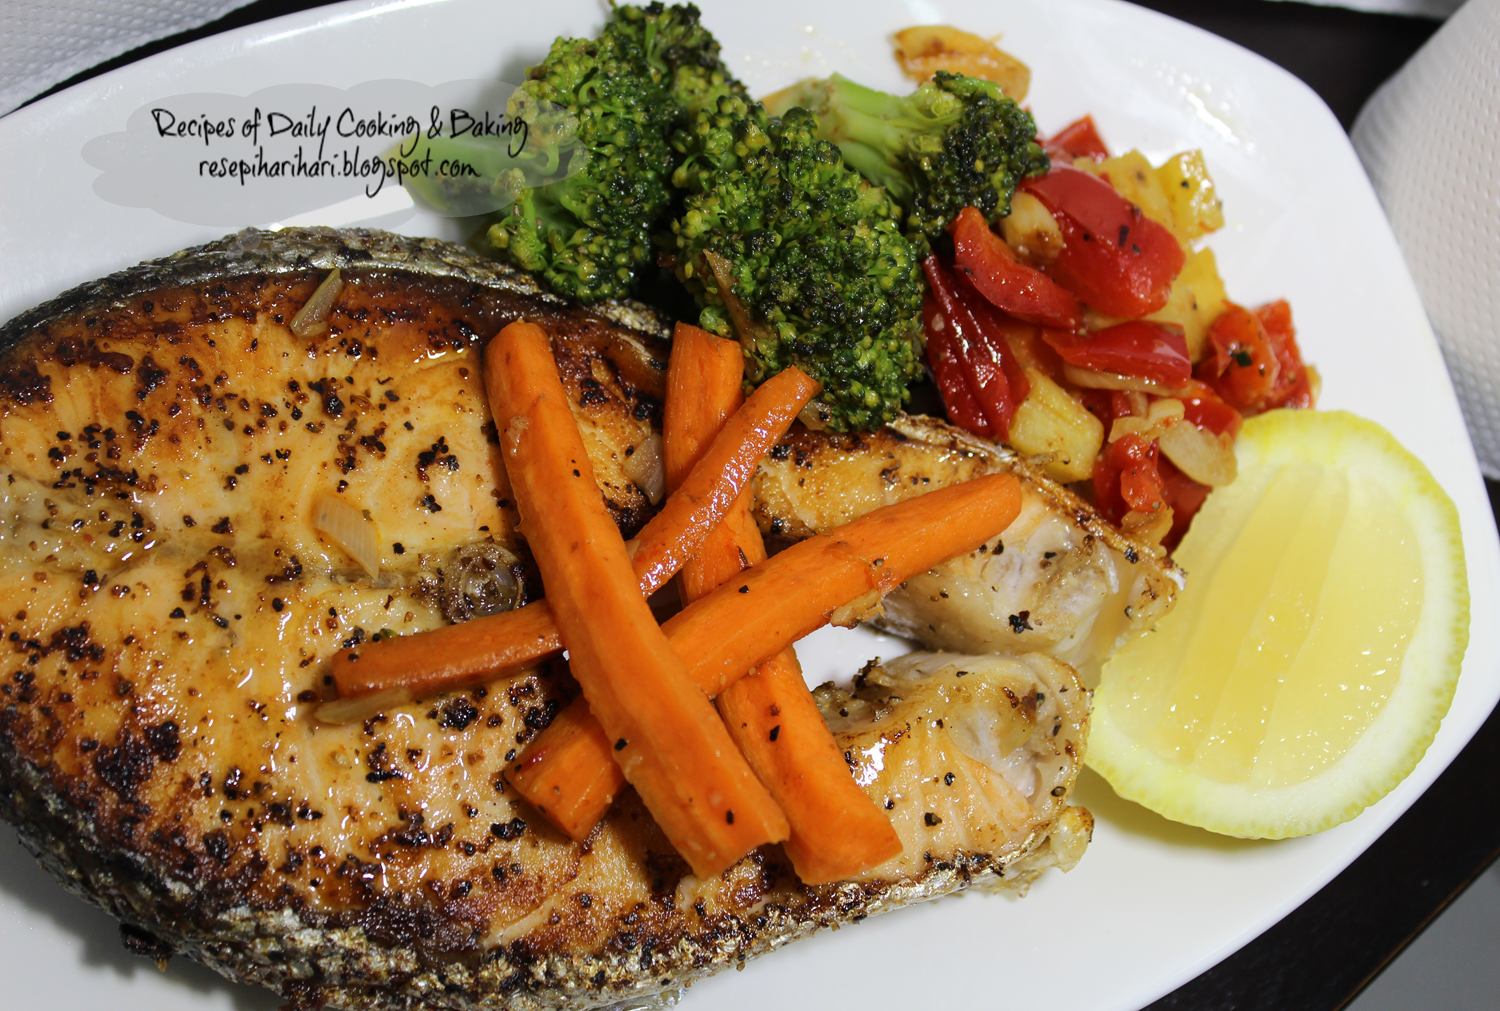 Recipes of Daily Cooking and Baking : Grilled Salmon and Vege